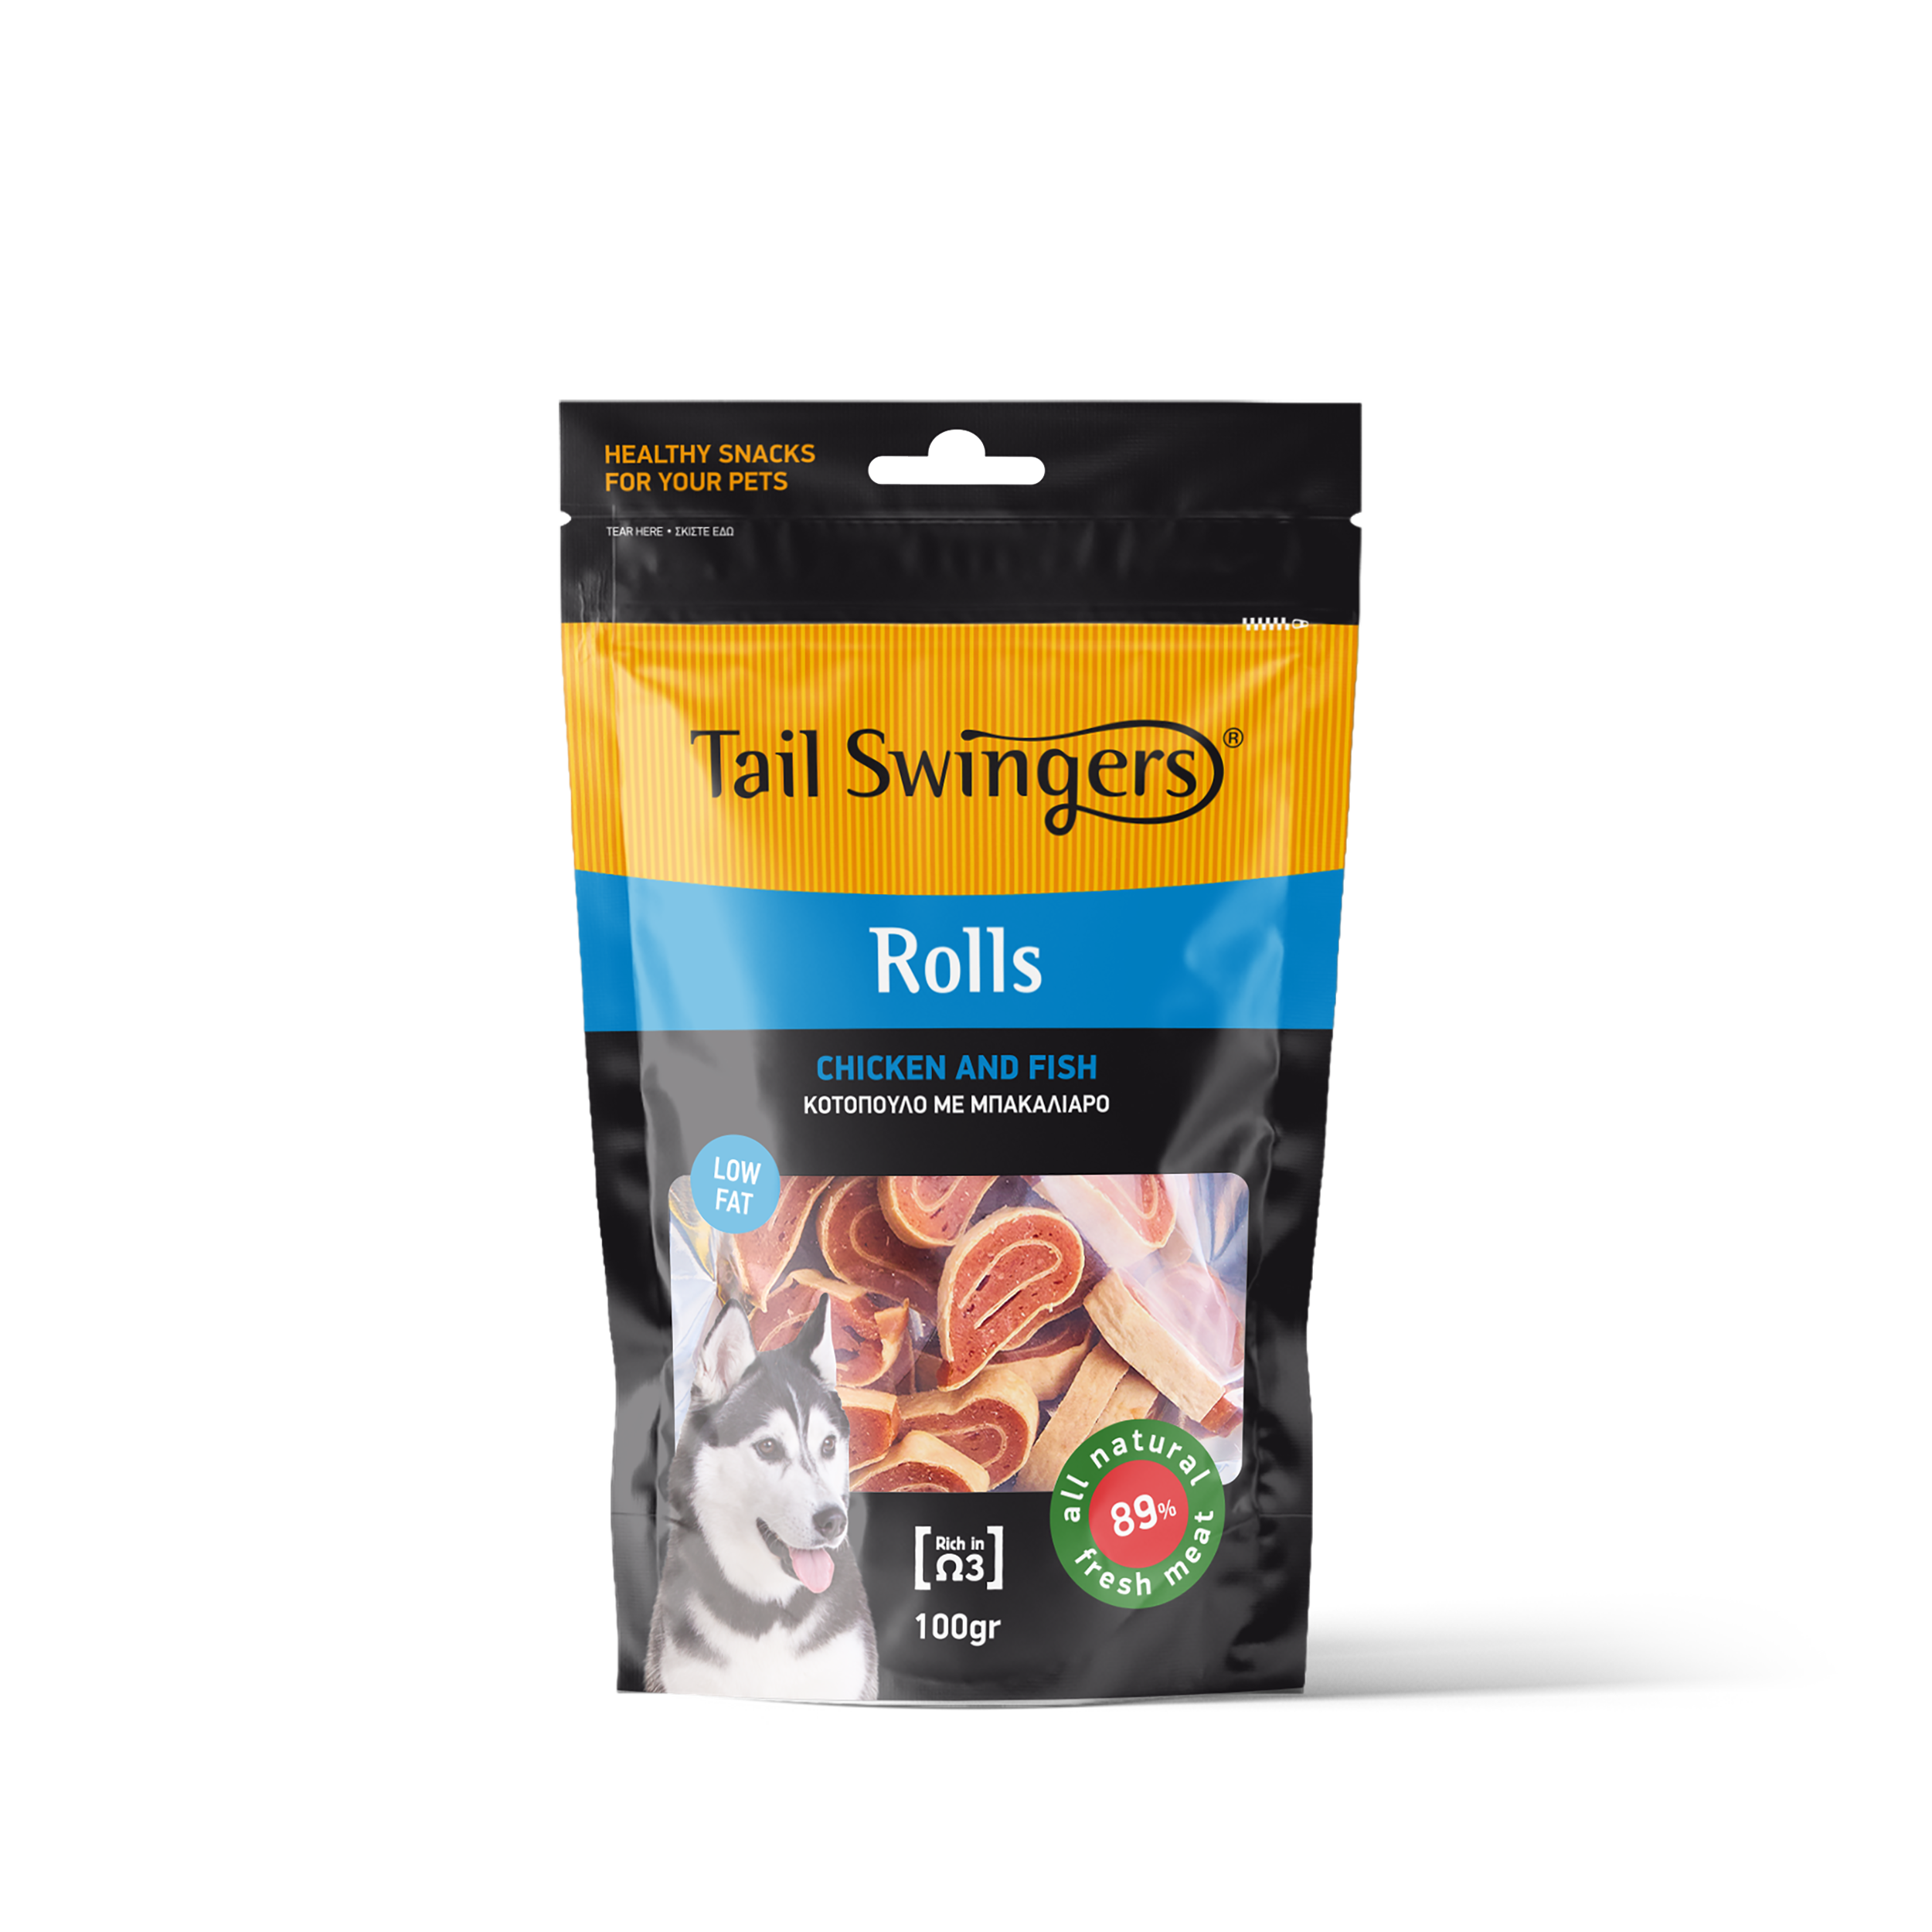 Tail Swingers Rolls with Chicken and Fish